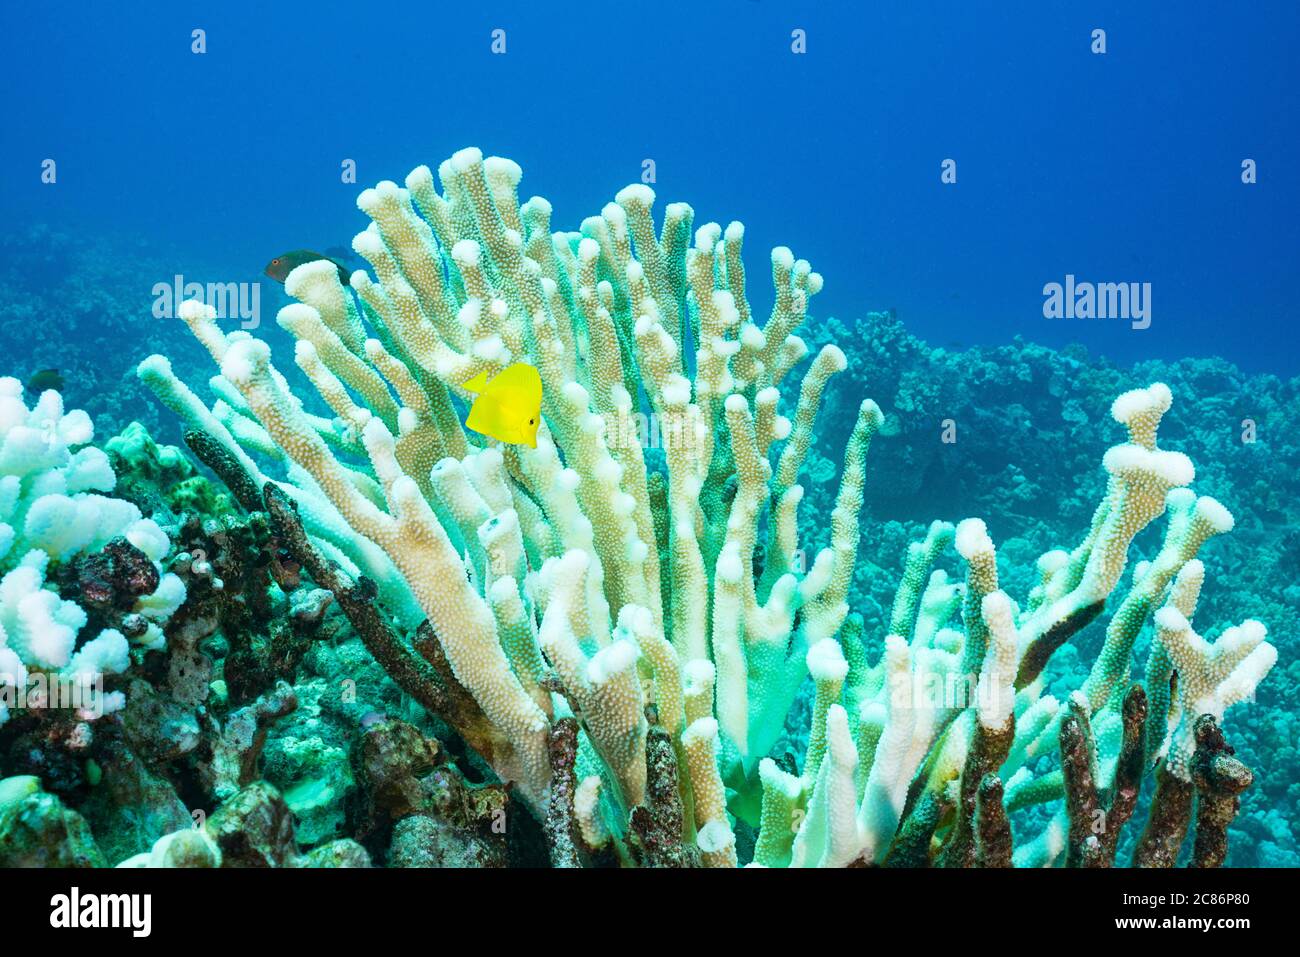 a yellow tang, Zebrasoma flavescens, swims among the branches of an antler coral, Pocillopora grandis, bleached by high water temperatures, Hawaii Stock Photo